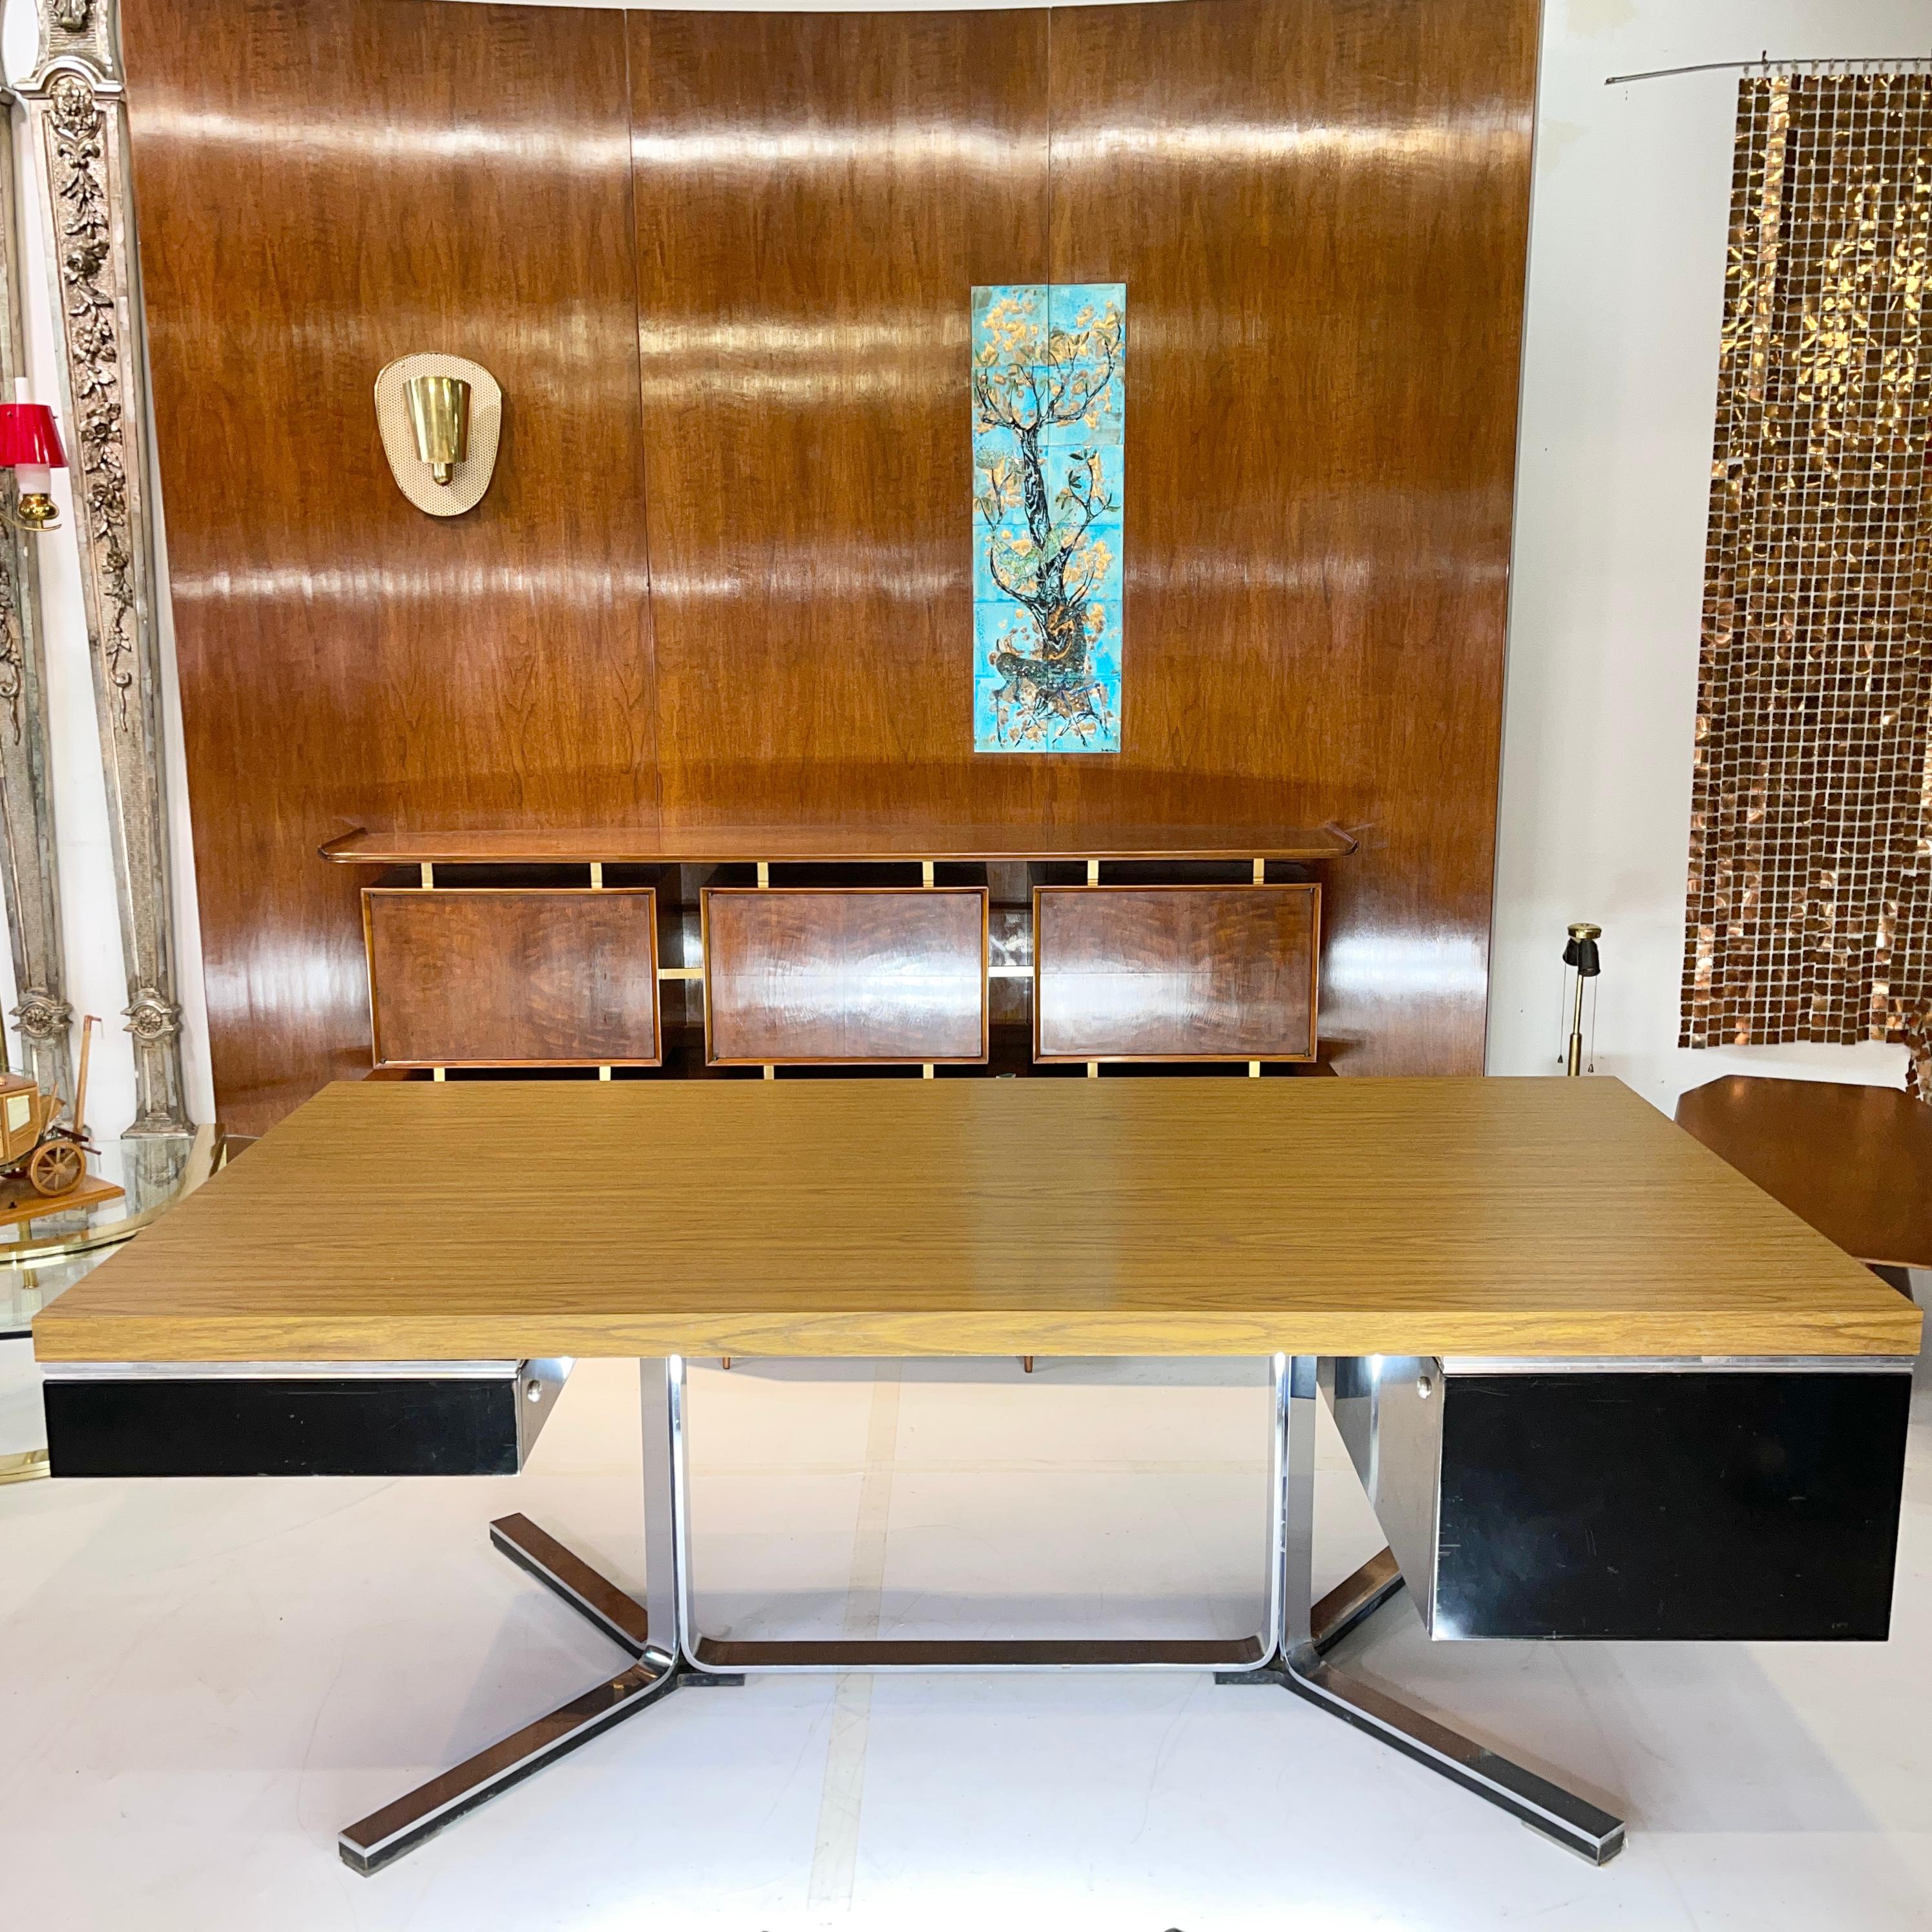 Executive desk formerly belonging to noted architect George M. Notter, (1933–2007) of the Boston firm Anderson Notter Finegold (now known as Finegold Alexander Architects).
Current institutional memory at the firm suggests it was a special order